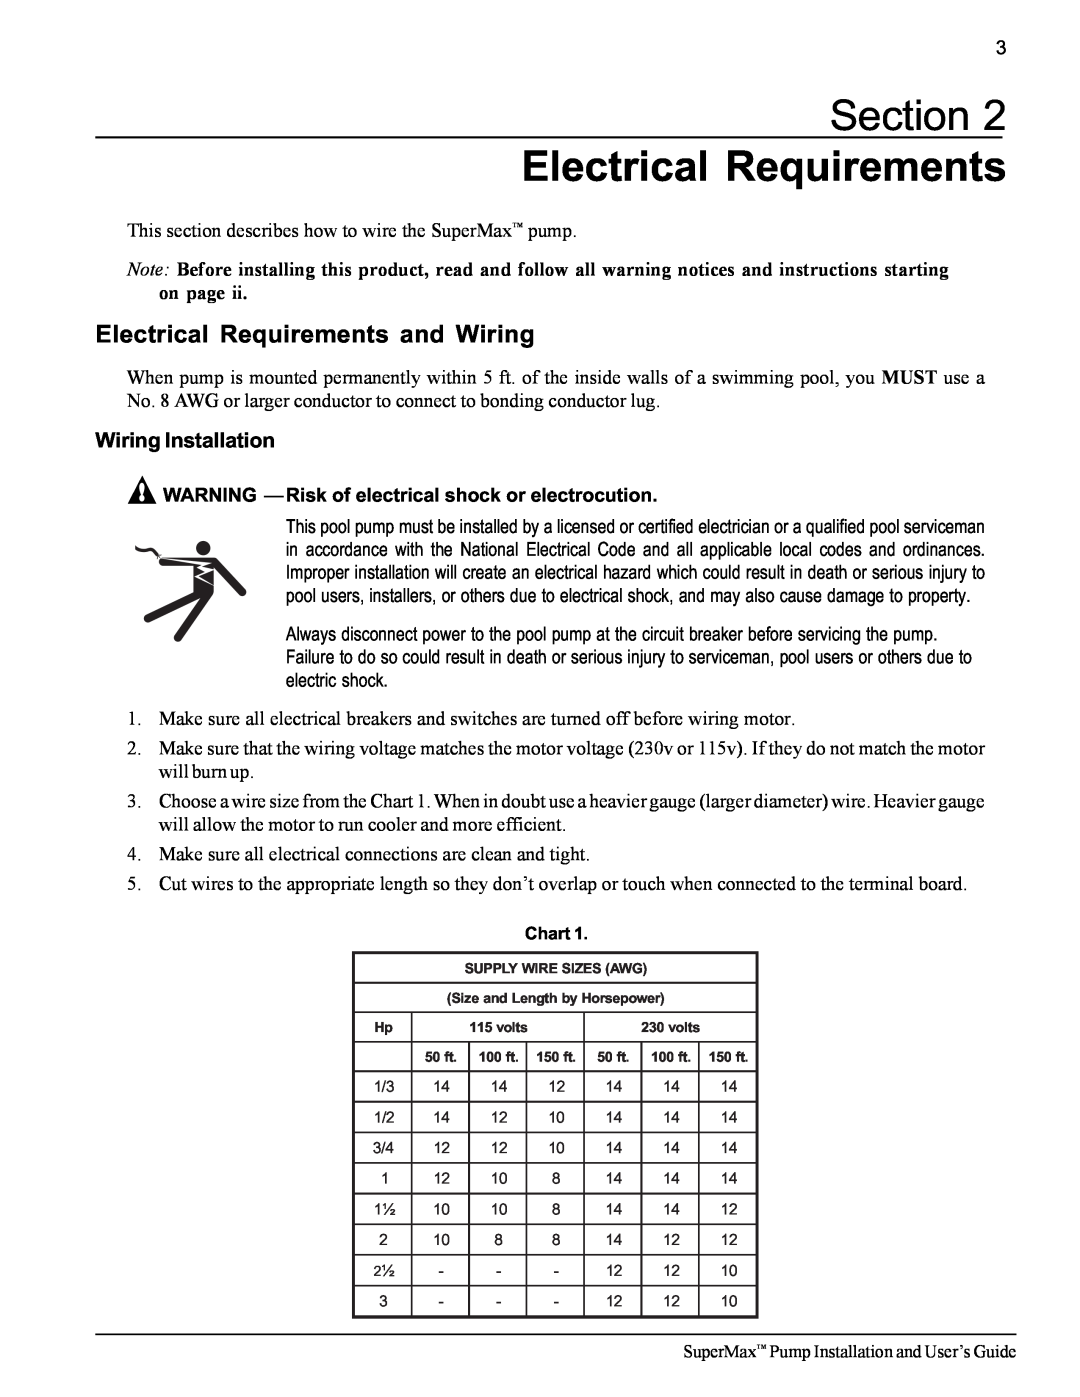 Pentair SuperMax Section Electrical Requirements, Electrical Requirements and Wiring, Wiring Installation 